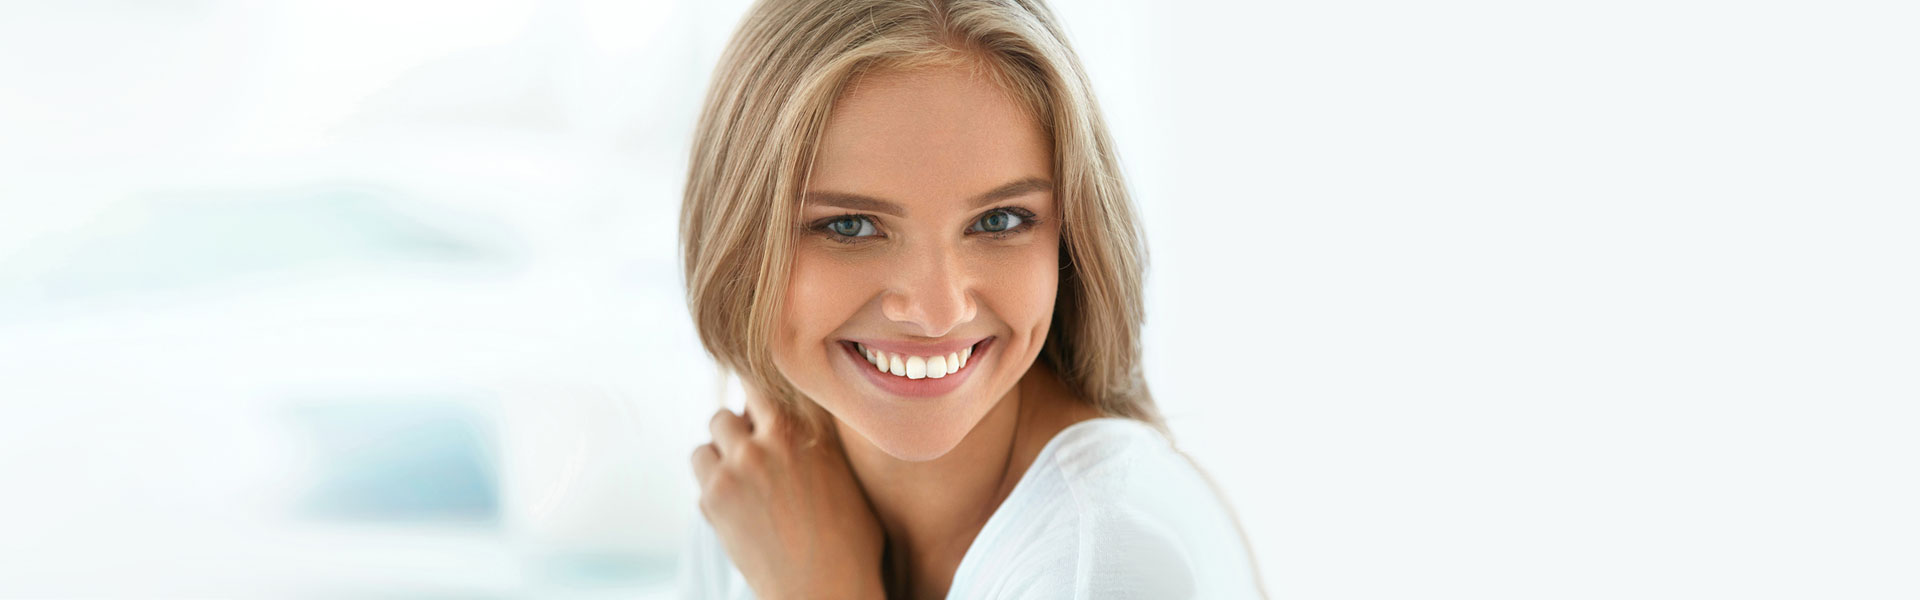 How to Get Whiter and Brighter Teeth for Less